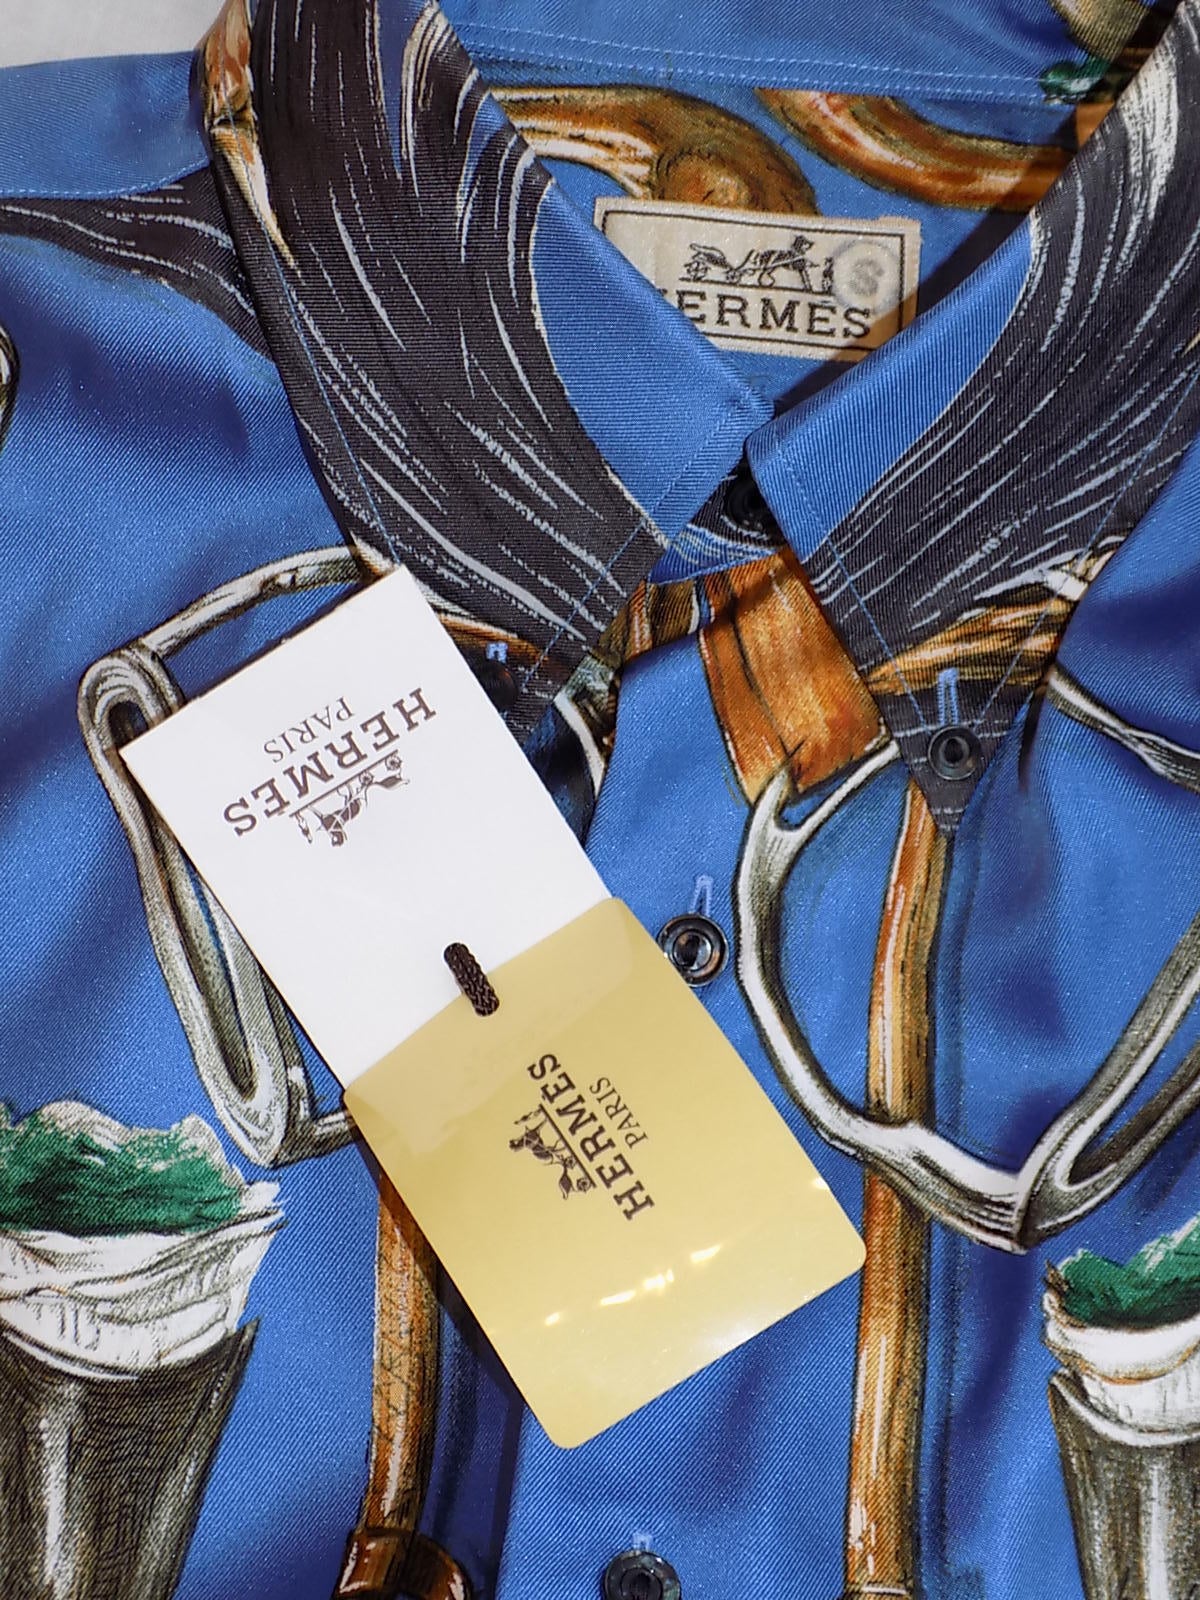 New With Tags Vintage Hermes Shirt  